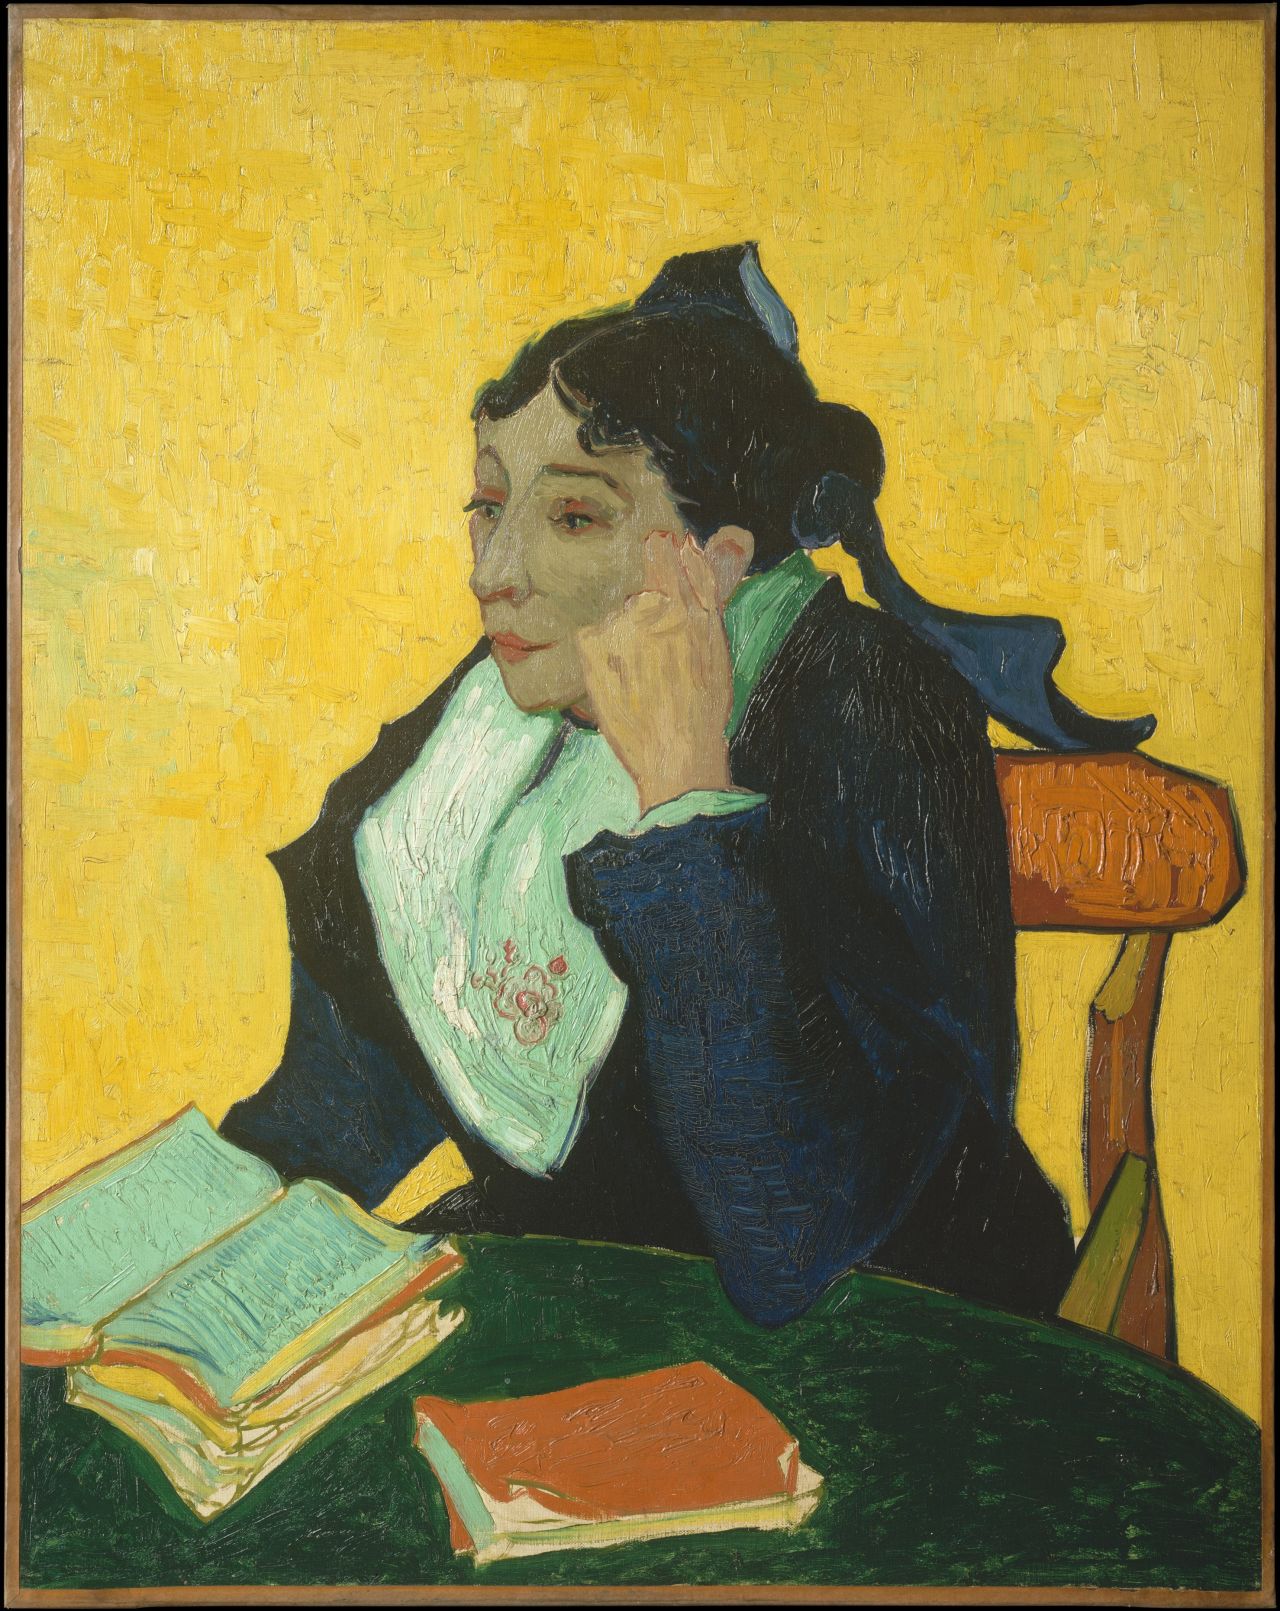 Van Gogh painted "The Arlésienne: Marie Ginoux" in 1888, during a period when Japanese influences were especially evident in his work.